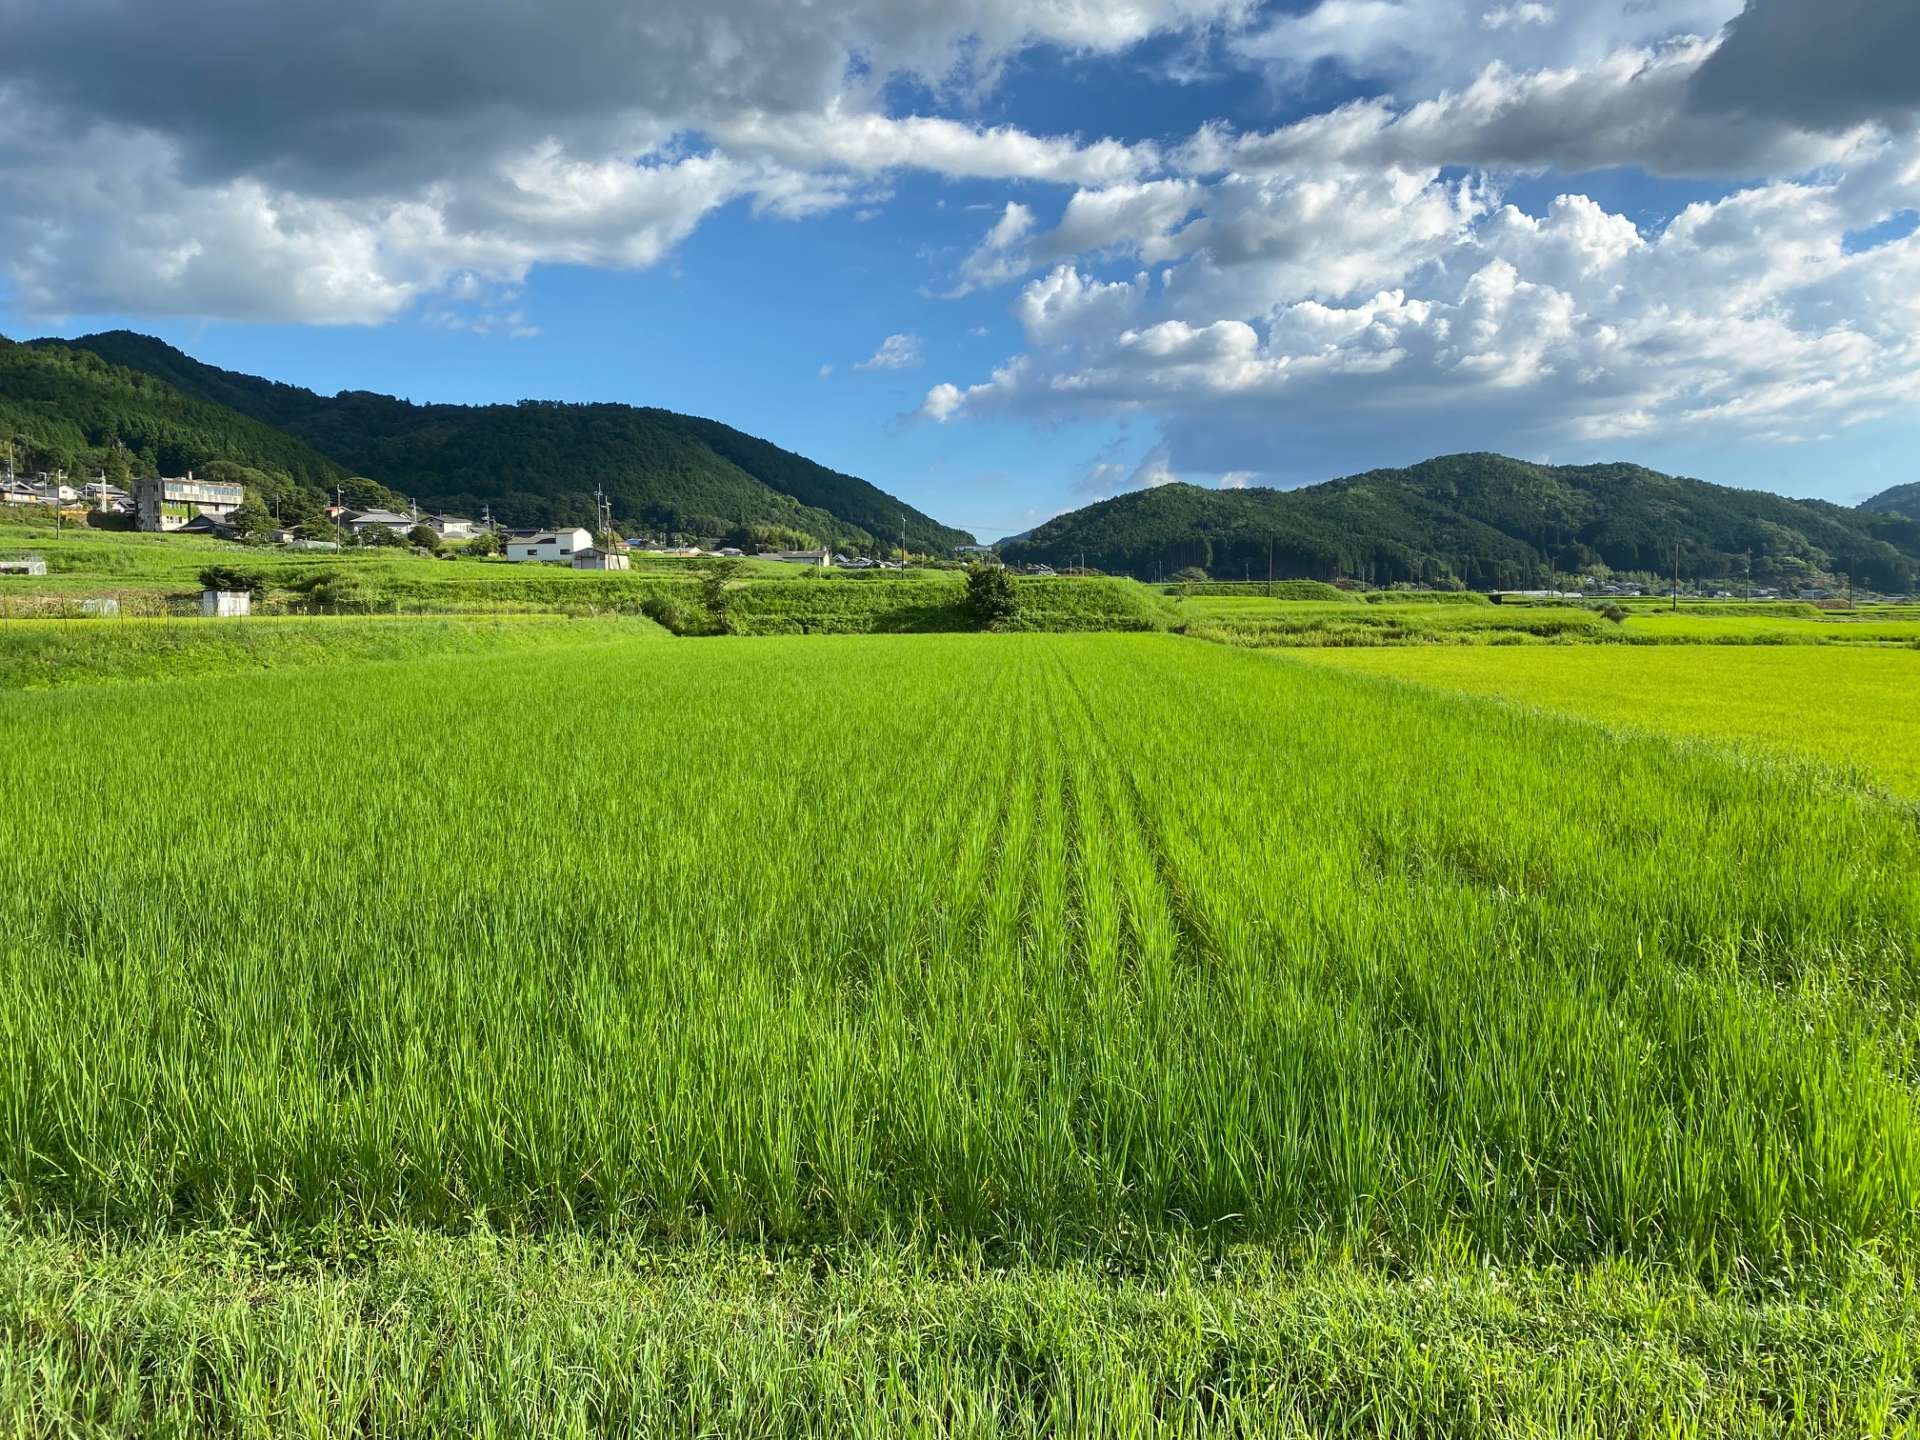 Sake rice is cultivated in the brewery's own fields in Nose Town during the summer.